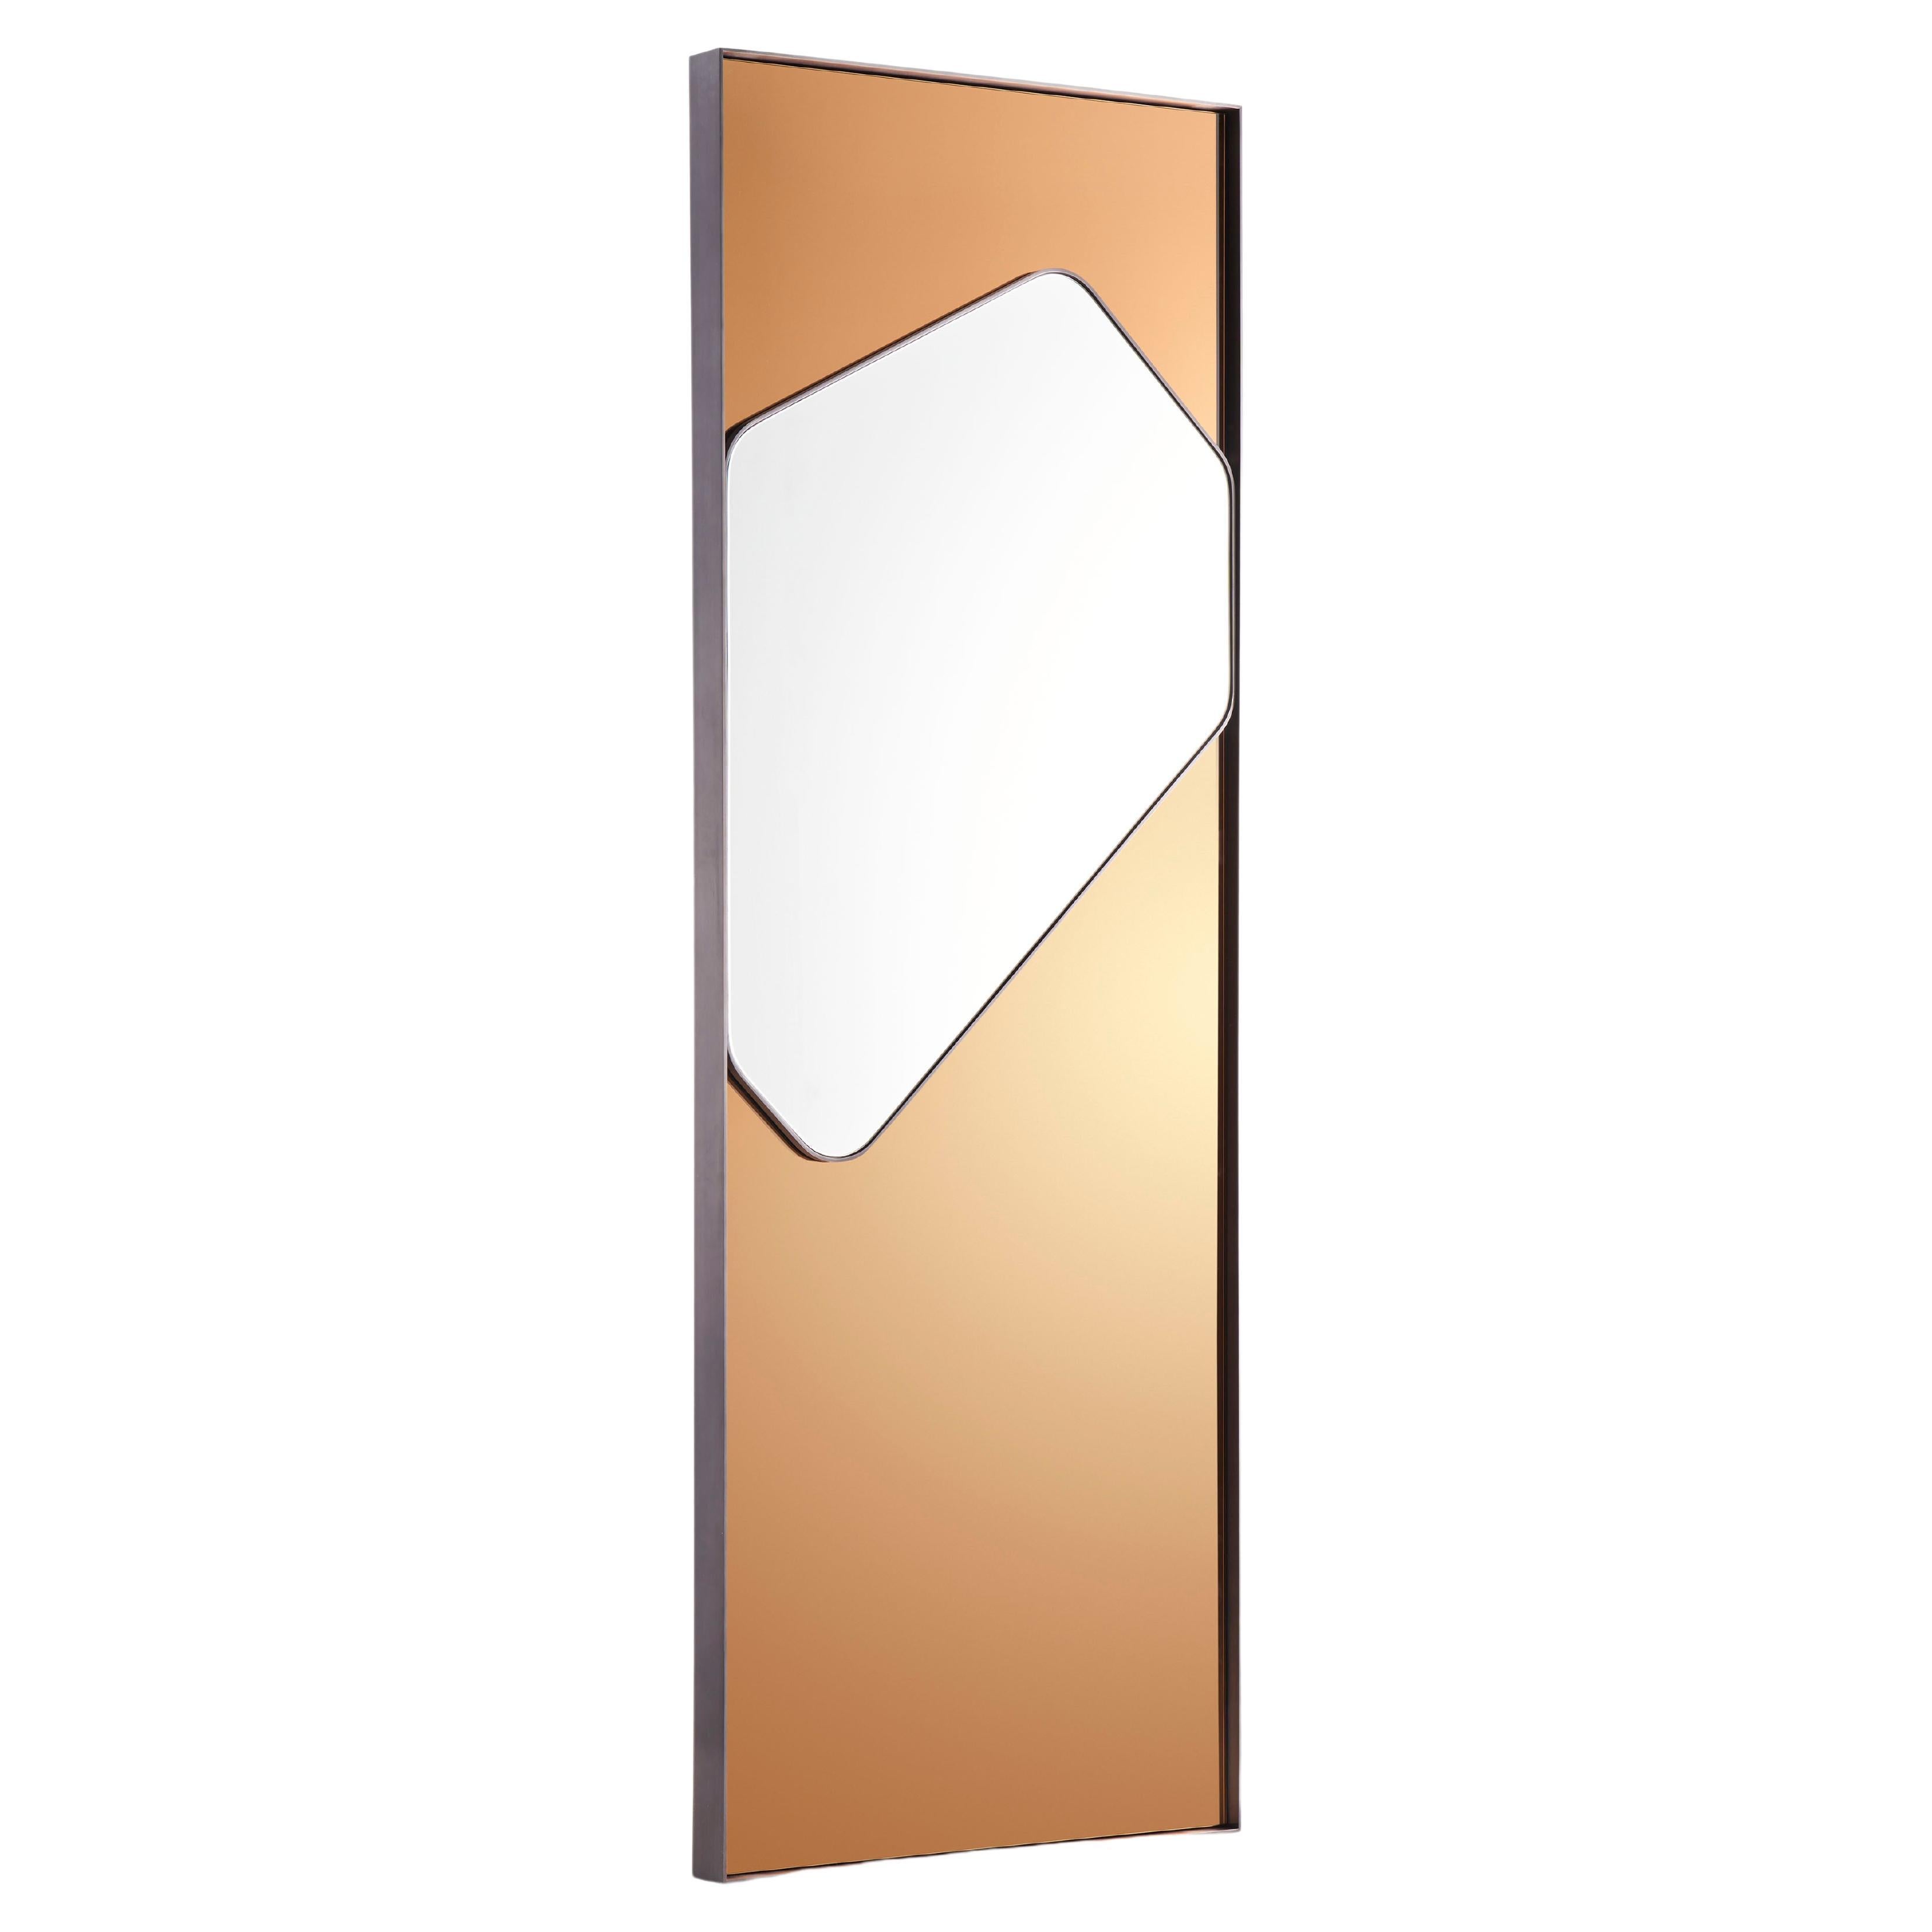 Ovo Trapezoid Mirror, Clear Mirror Set Onto a Colored Mirror Background For Sale